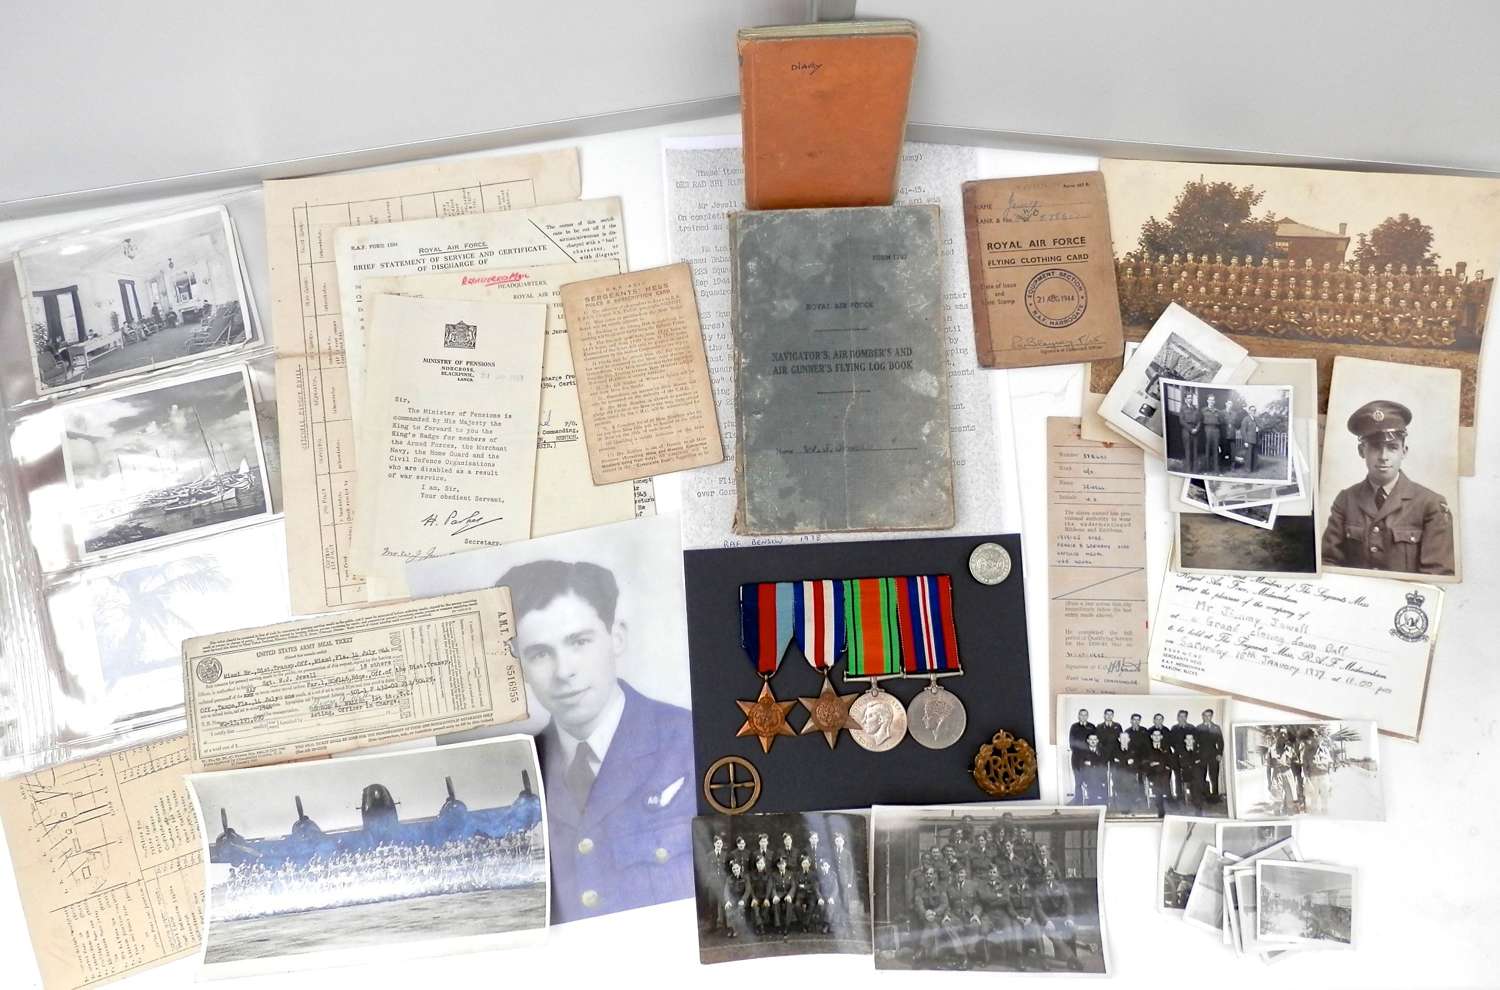 RAF logbook and medal grouping